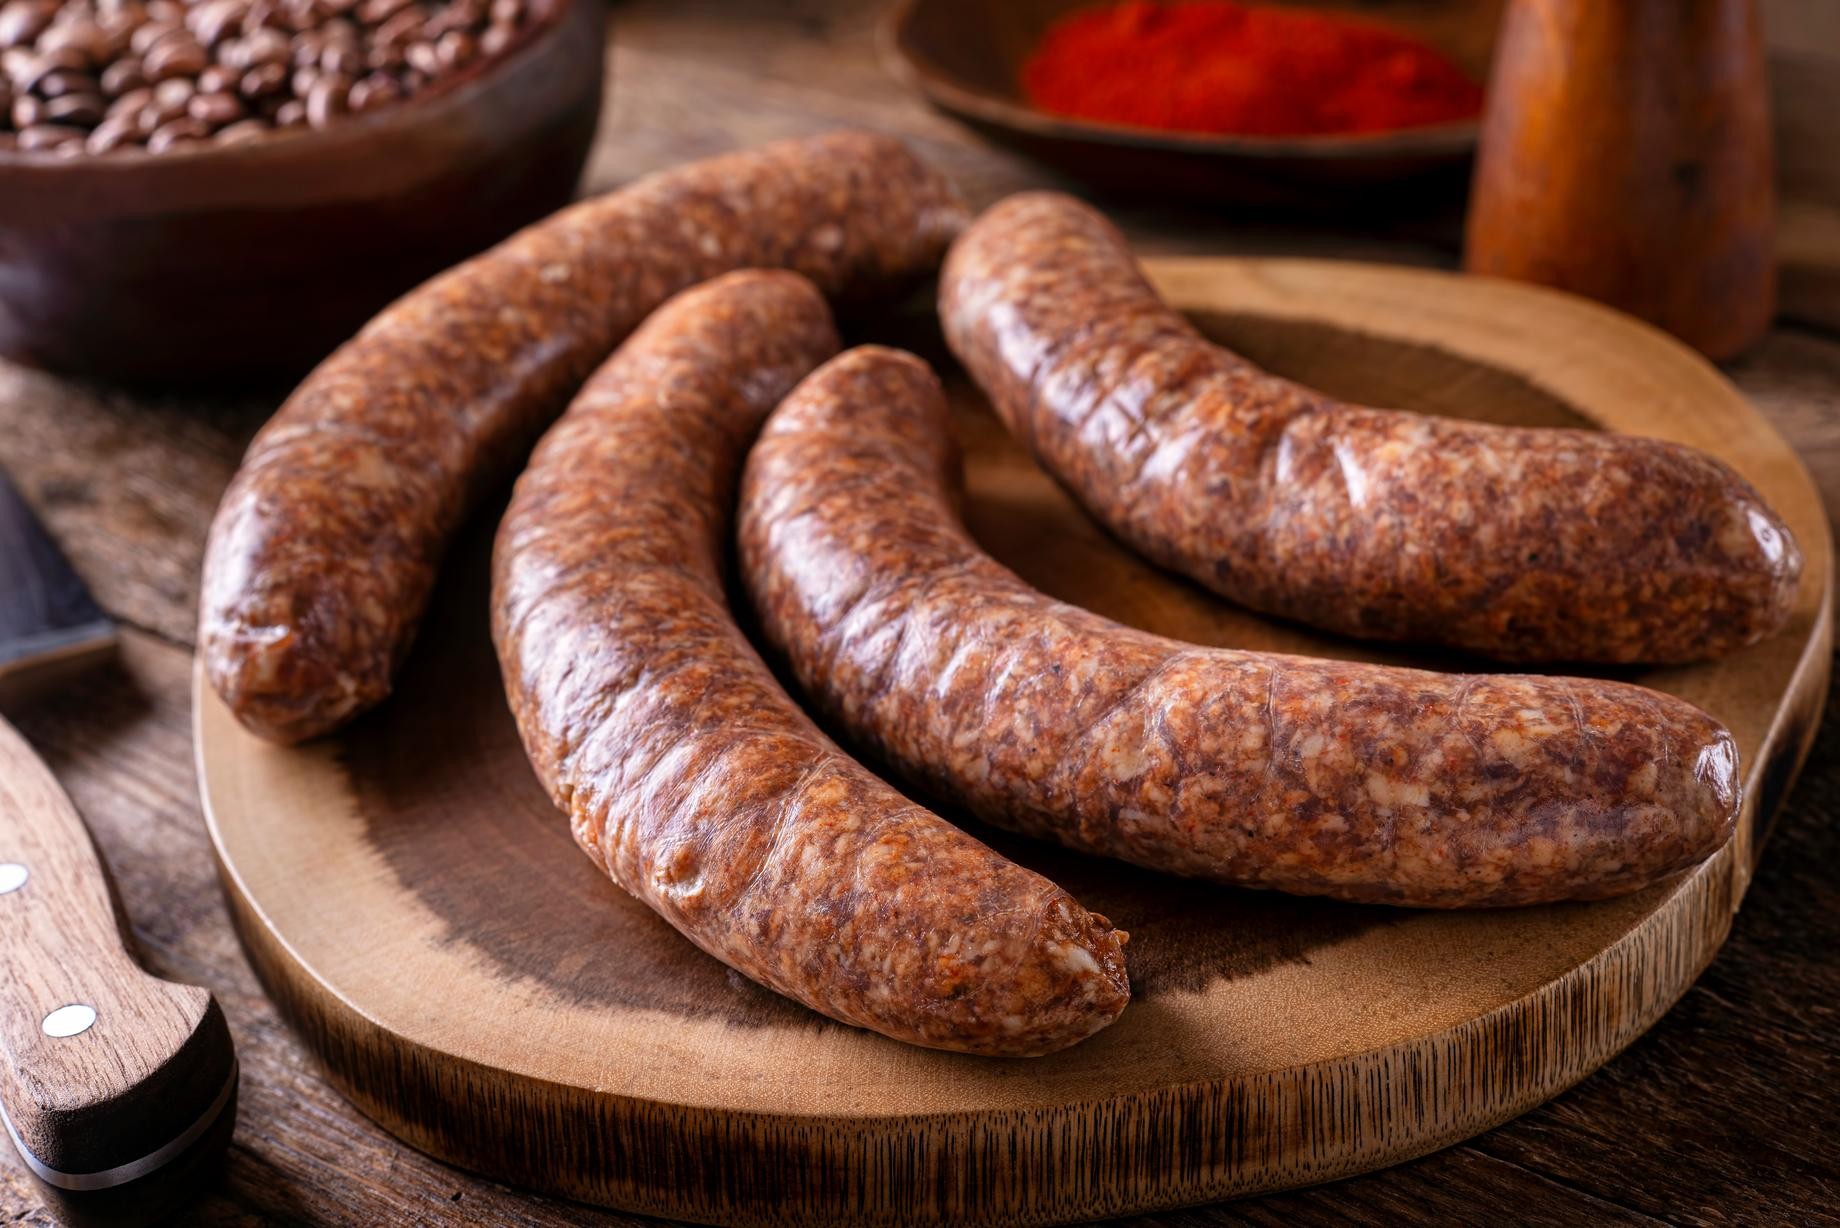 Additional Spicy Sausages (1 lb)